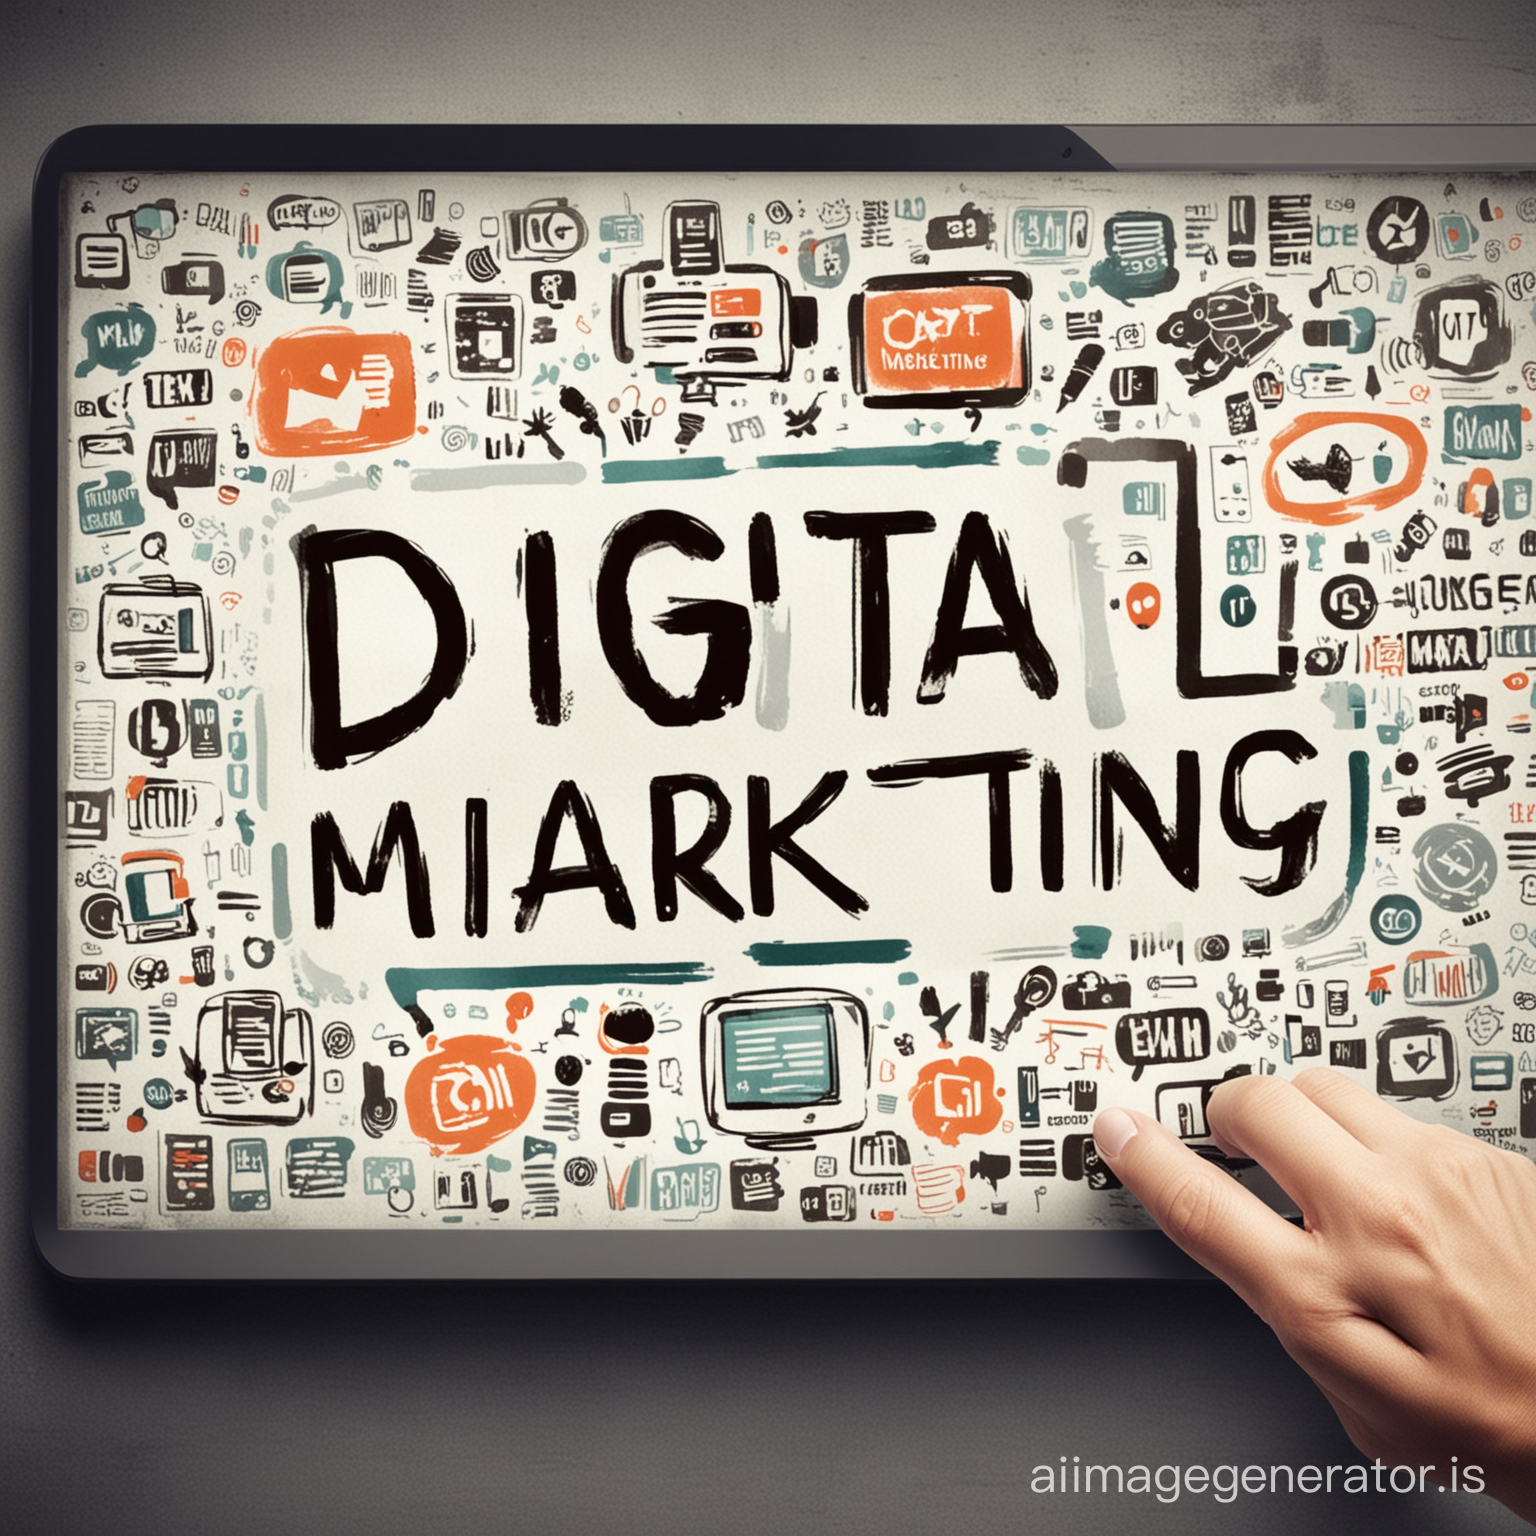 Digital marketing with text